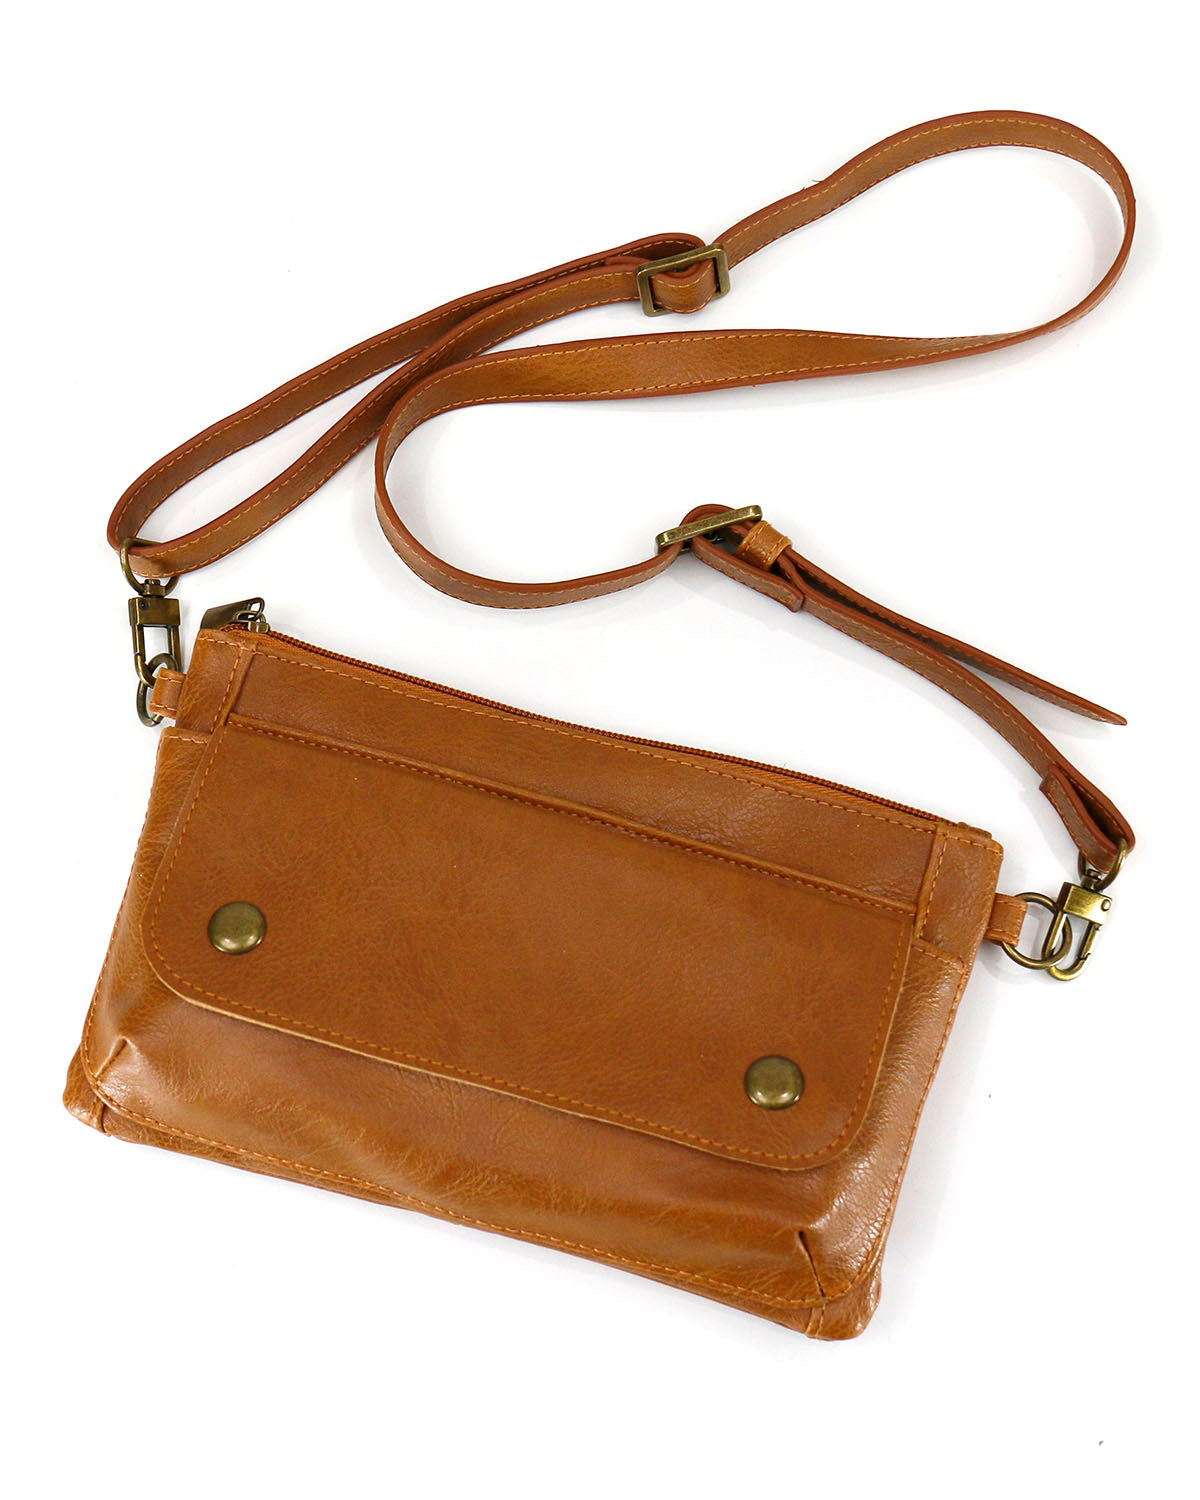 Purchase Wholesale western belt bags. Free Returns & Net 60 Terms